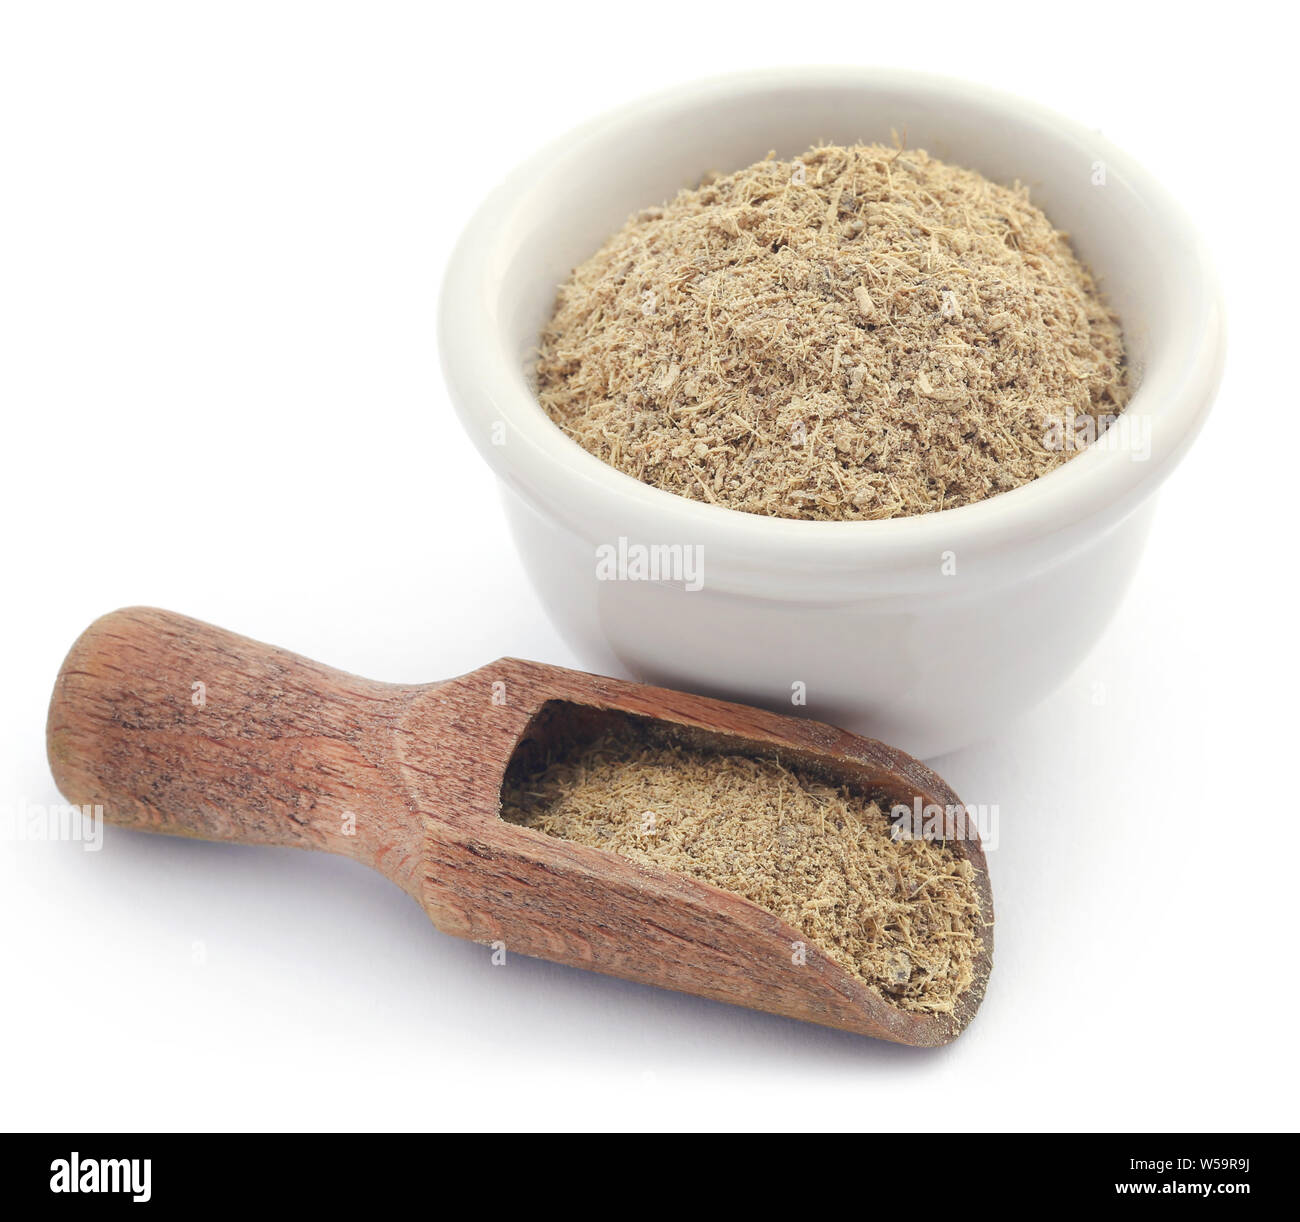 Liquorice stick and ground in a small bowl over white background Stock Photo